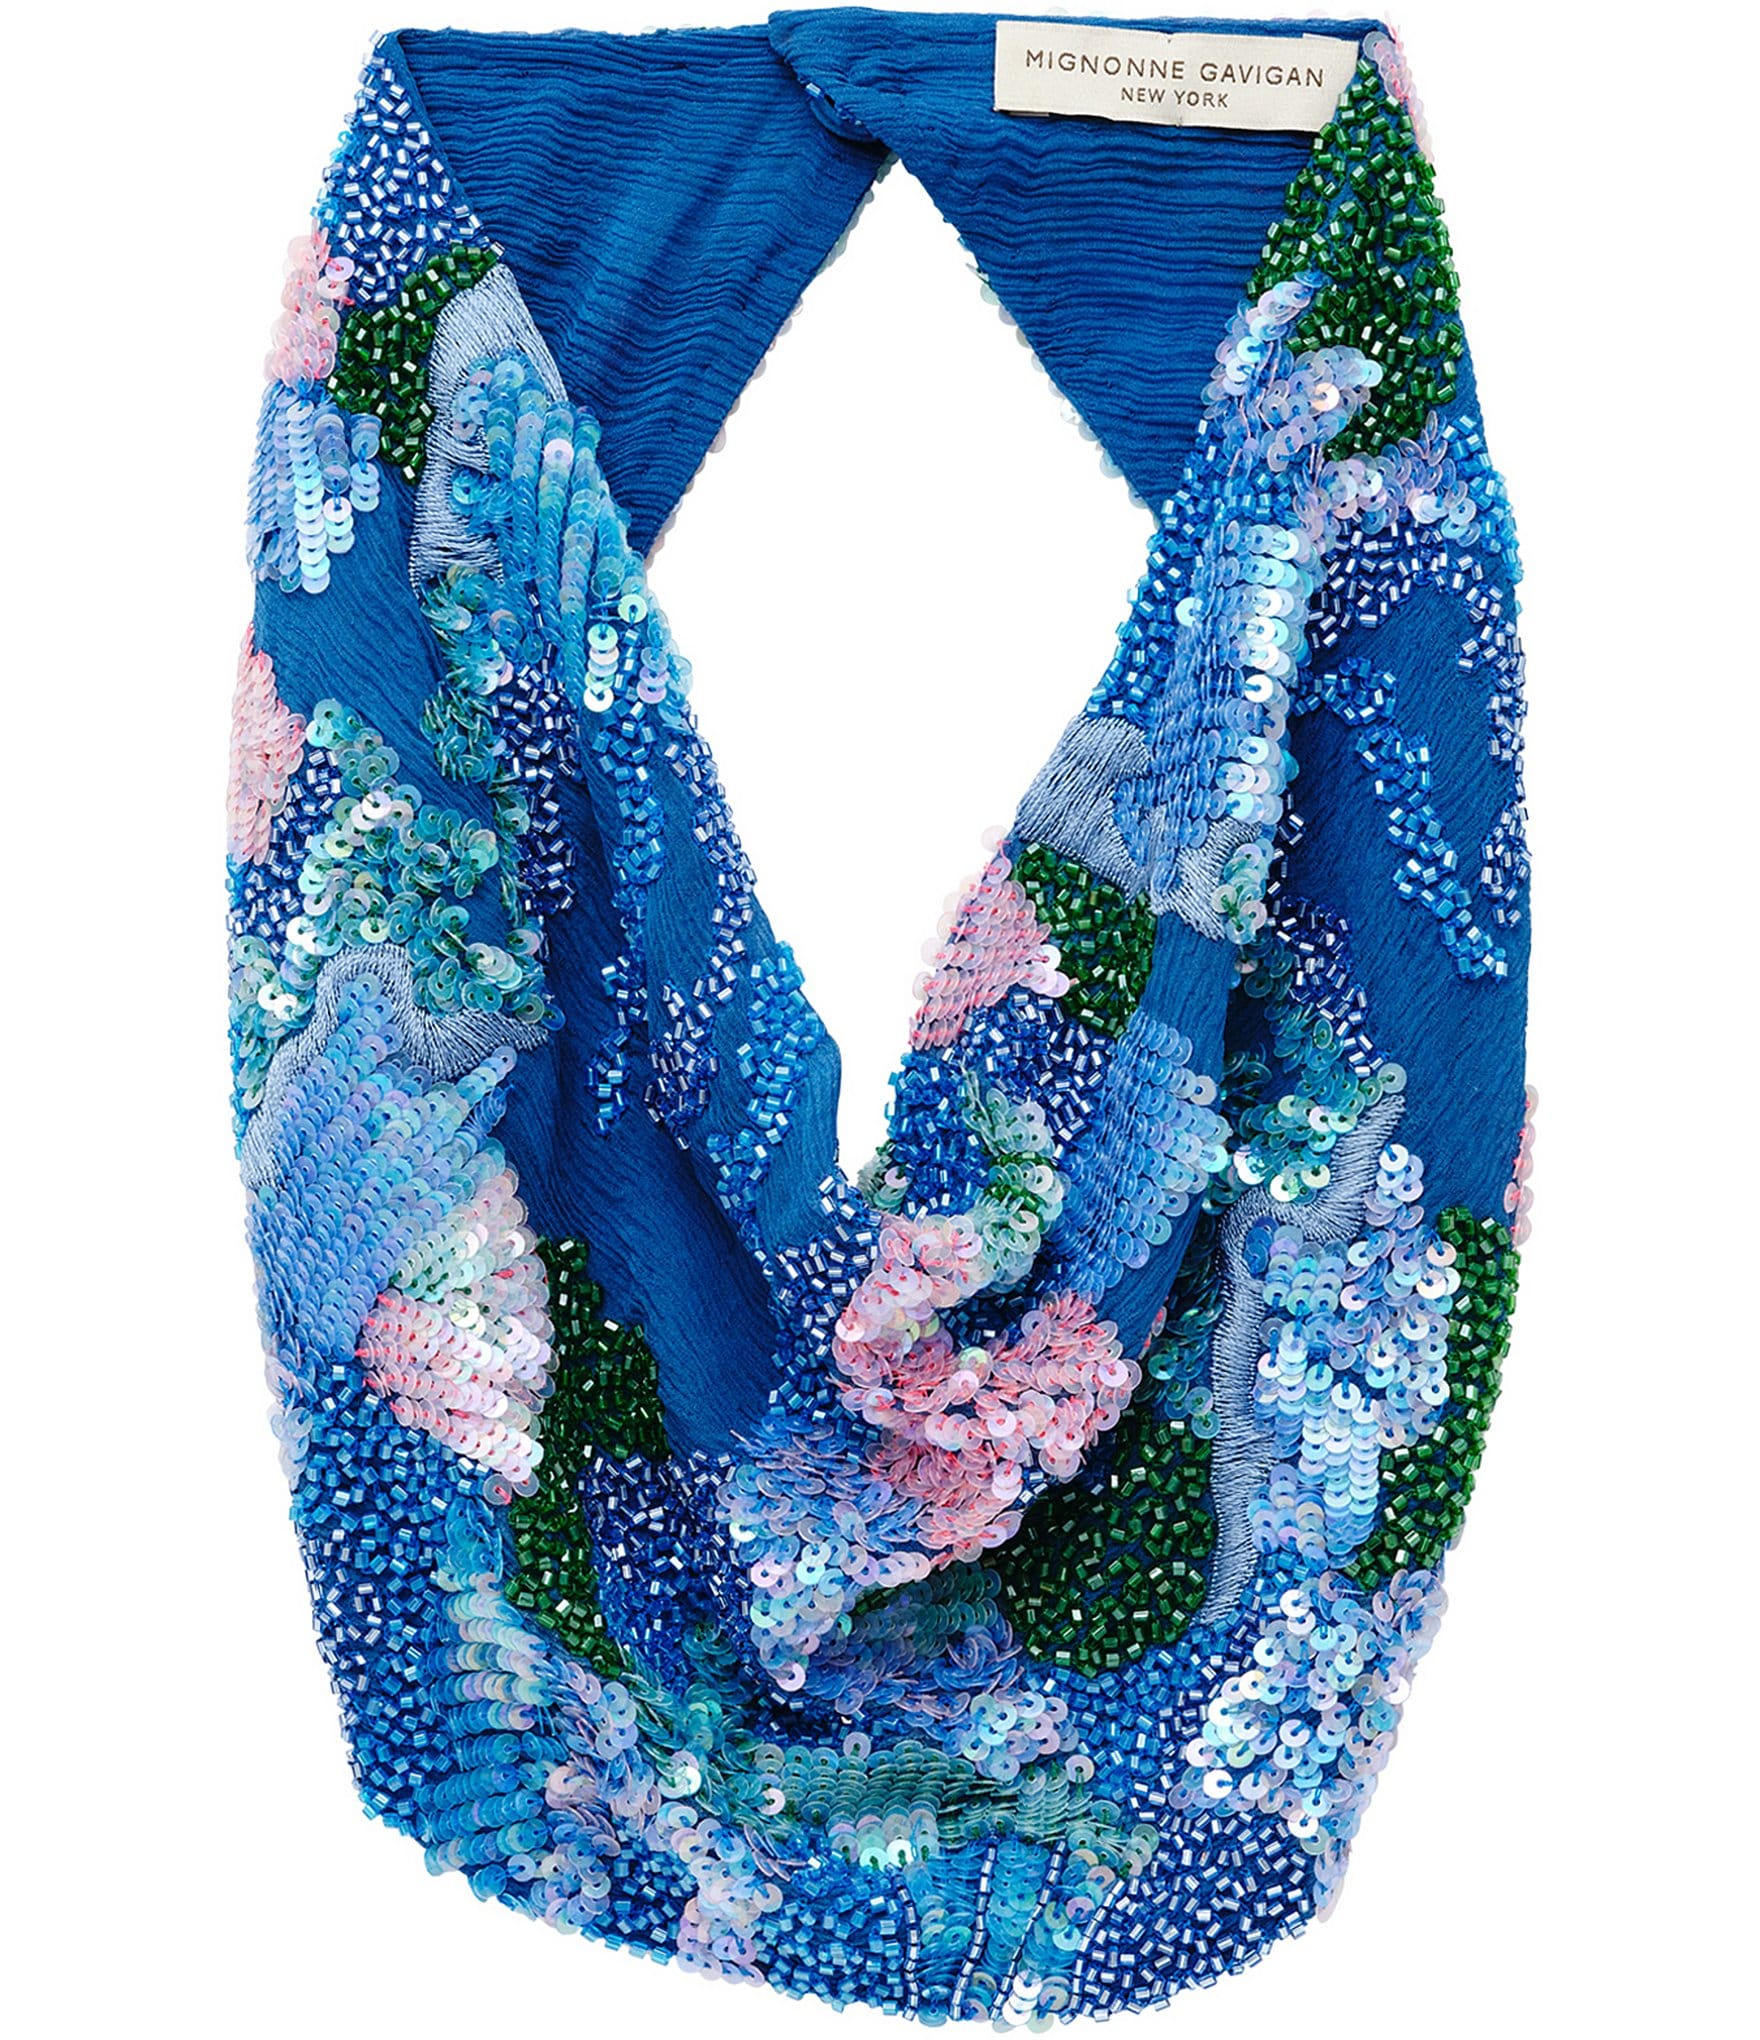 Mignonne Gavigan Adele Beaded Silk Scarf Necklace | Anthropologie Japan -  Women's Clothing, Accessories & Home